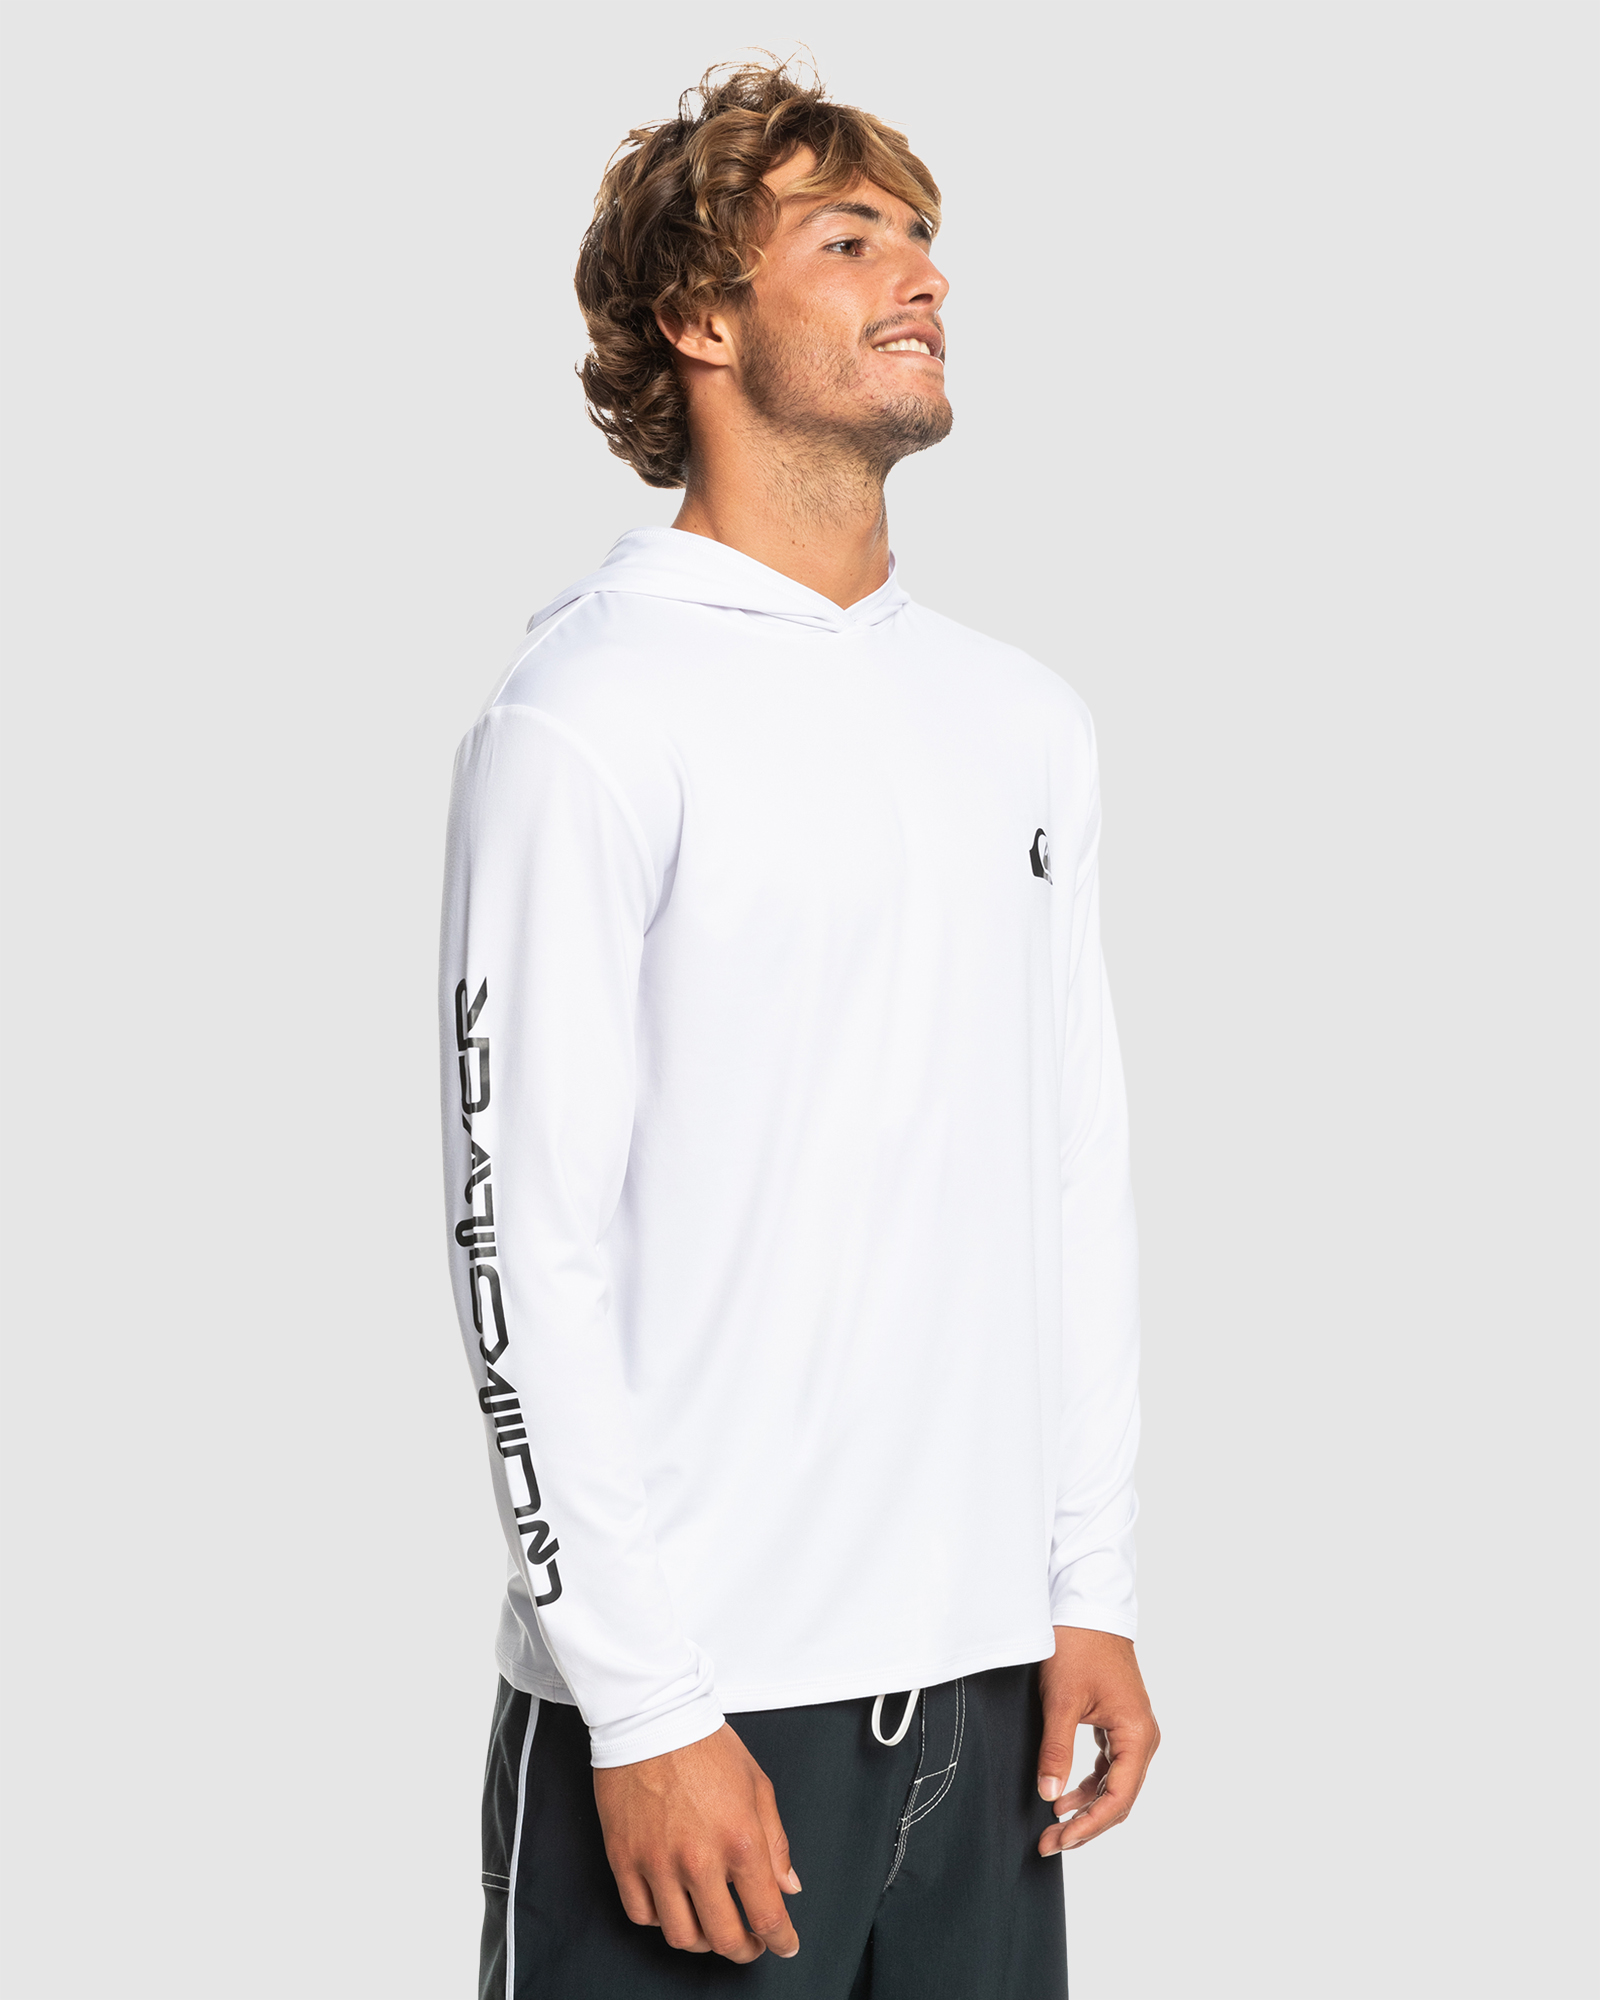 Quiksilver Omni Session - Ls Surf Tee For Men - White | SurfStitch